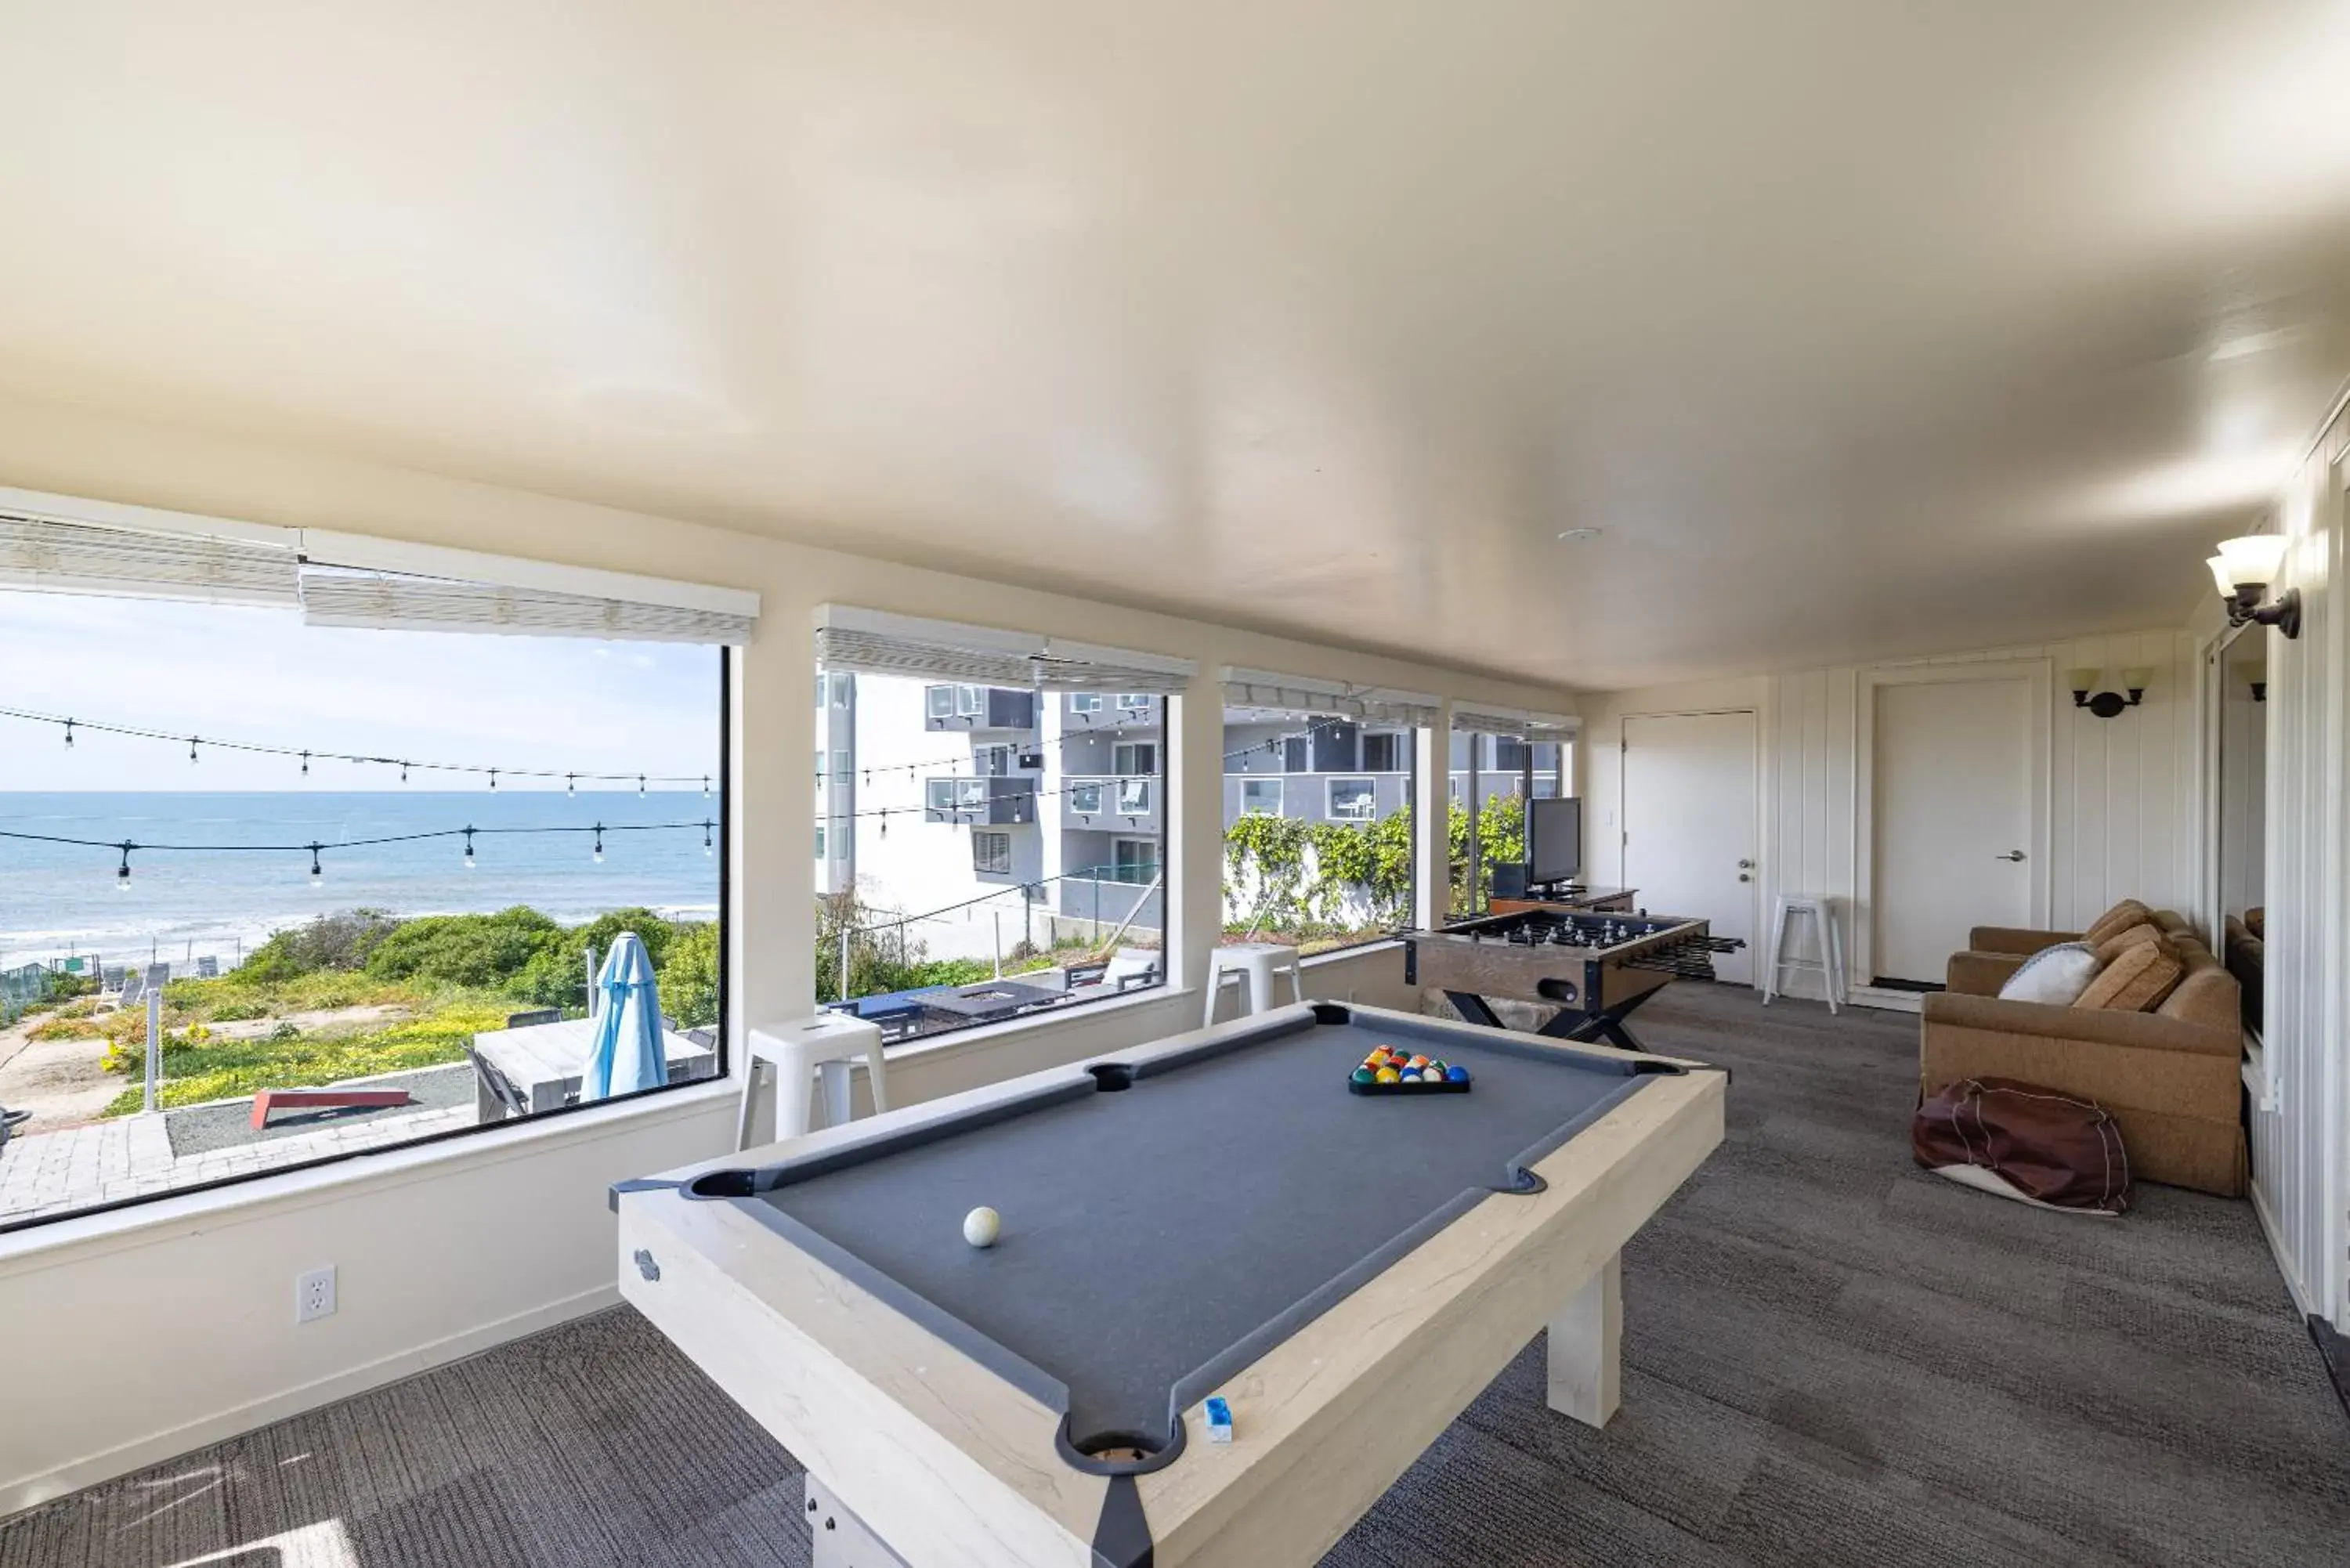 Billiard, Billiards in Tides Oceanview Inn and Cottages